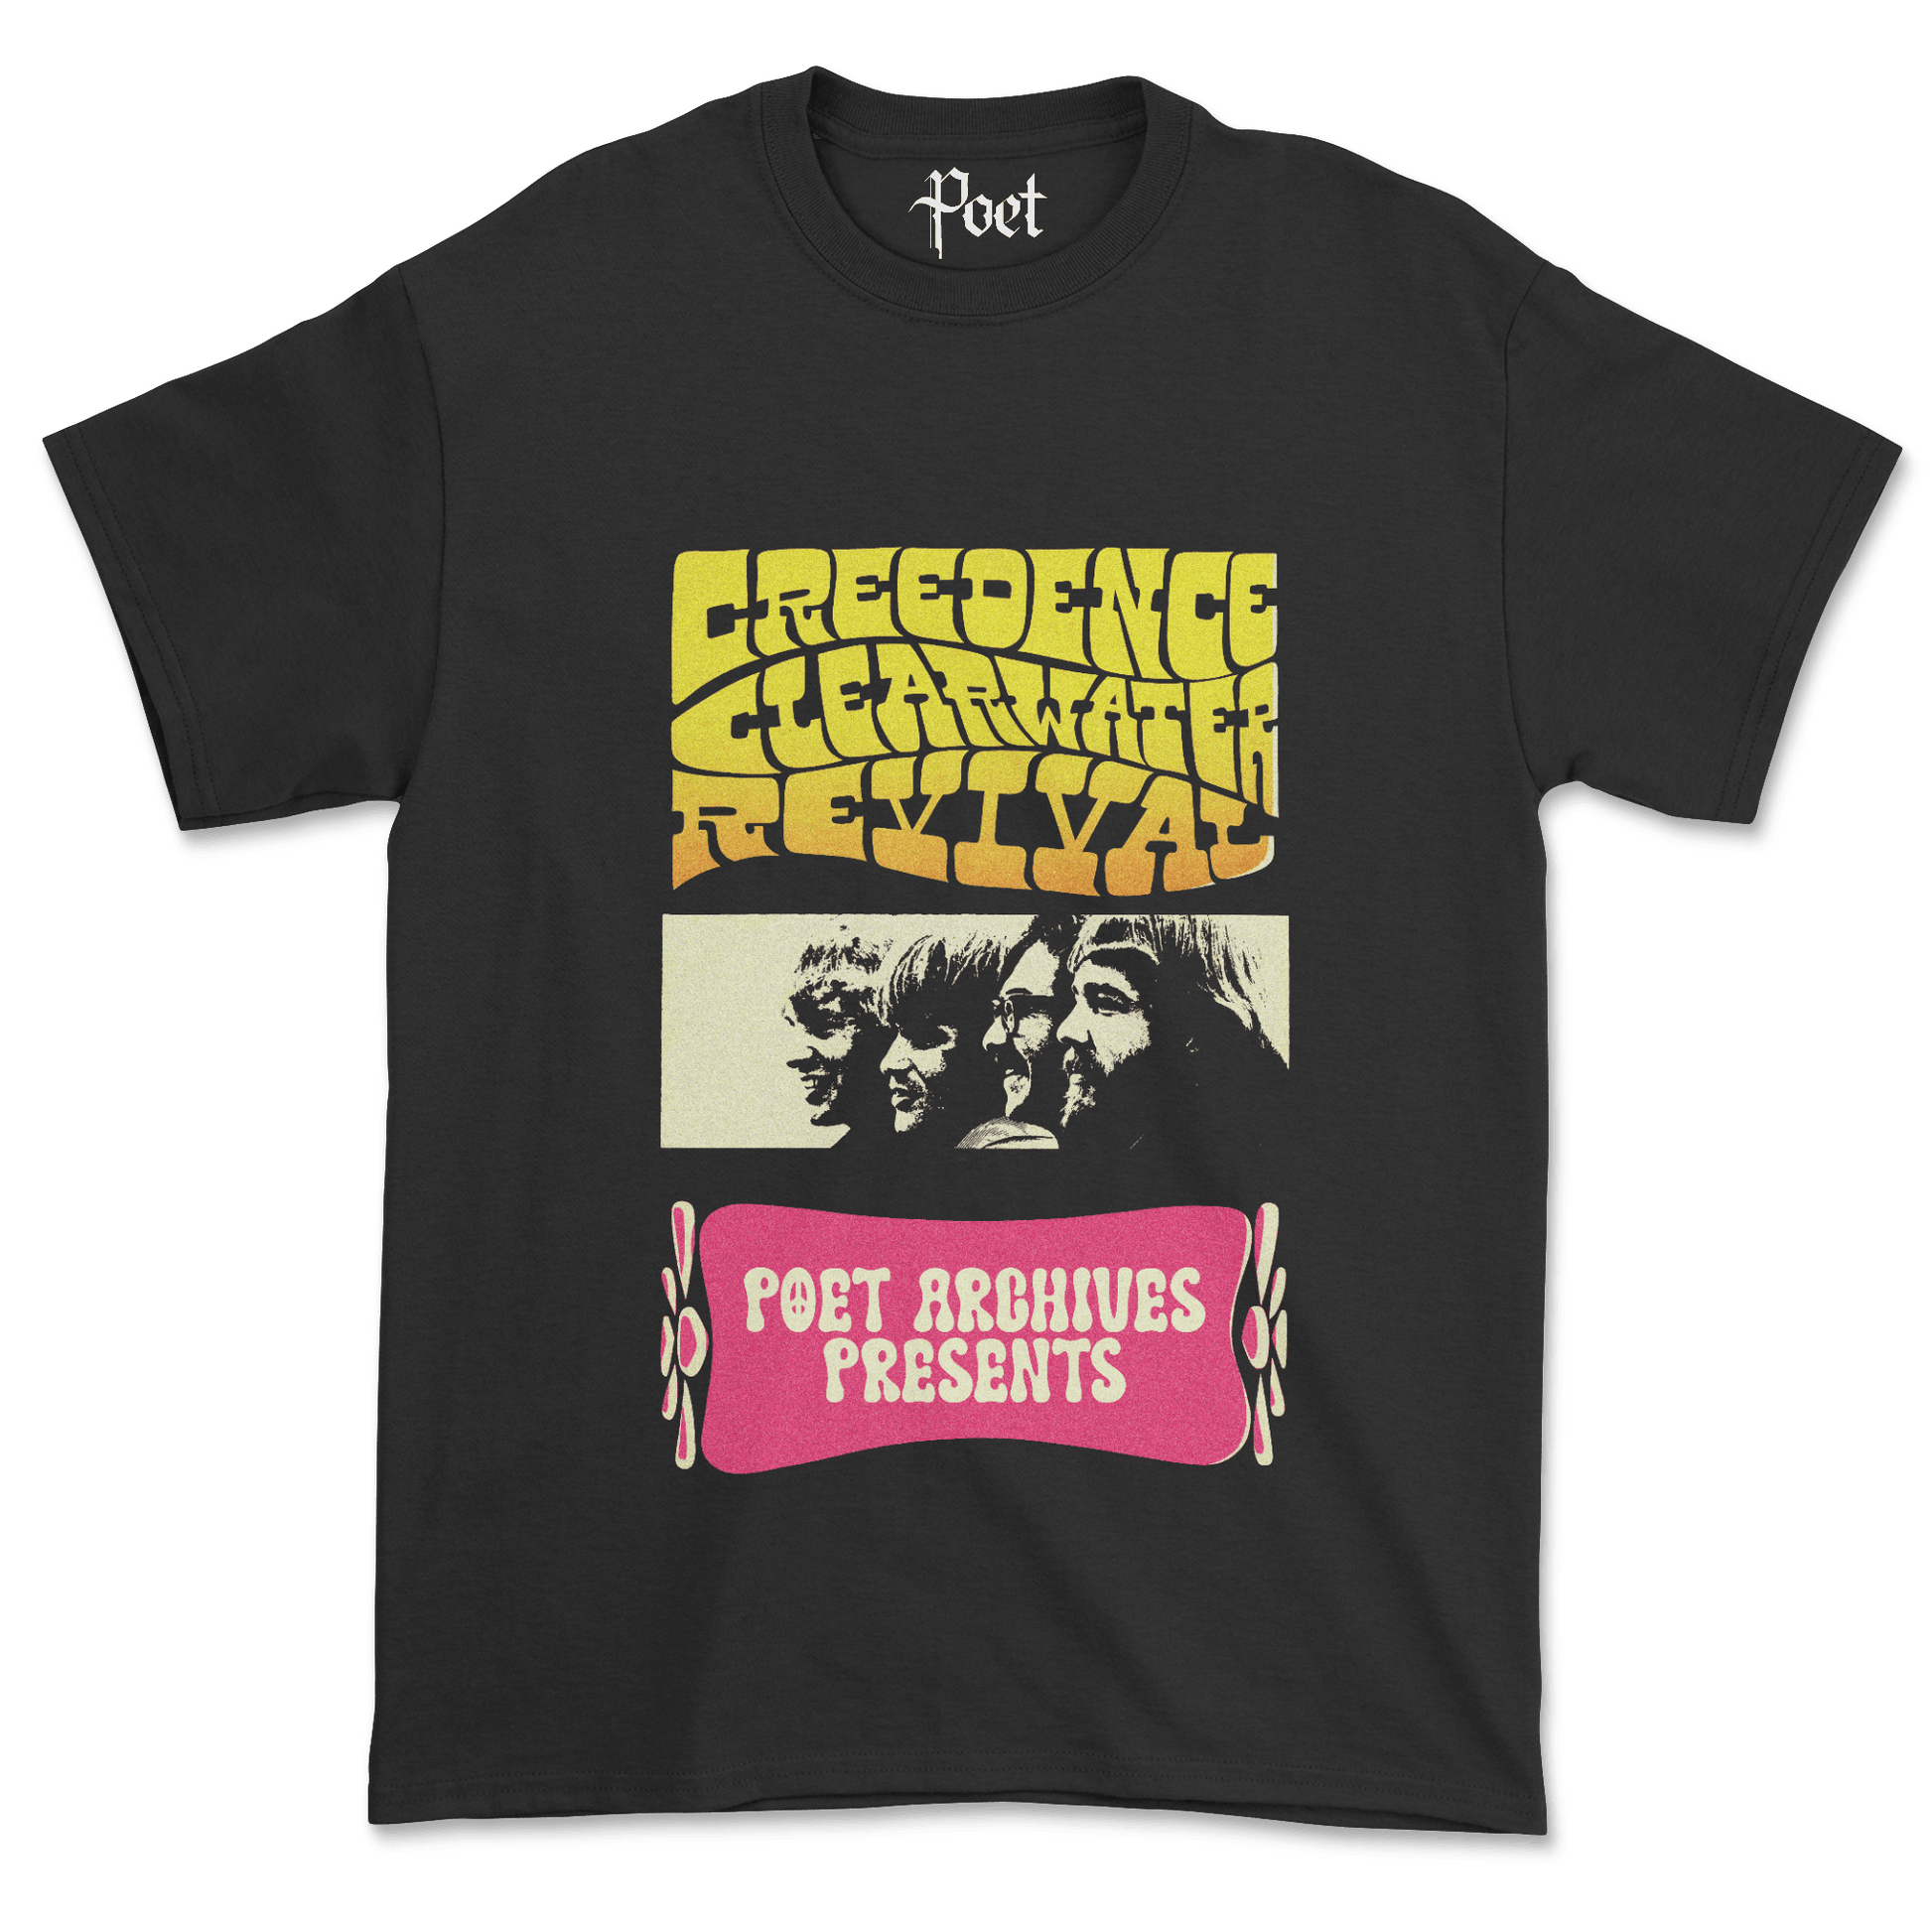 Creedence Clearwater Revival T-Shirt - Poet Archives